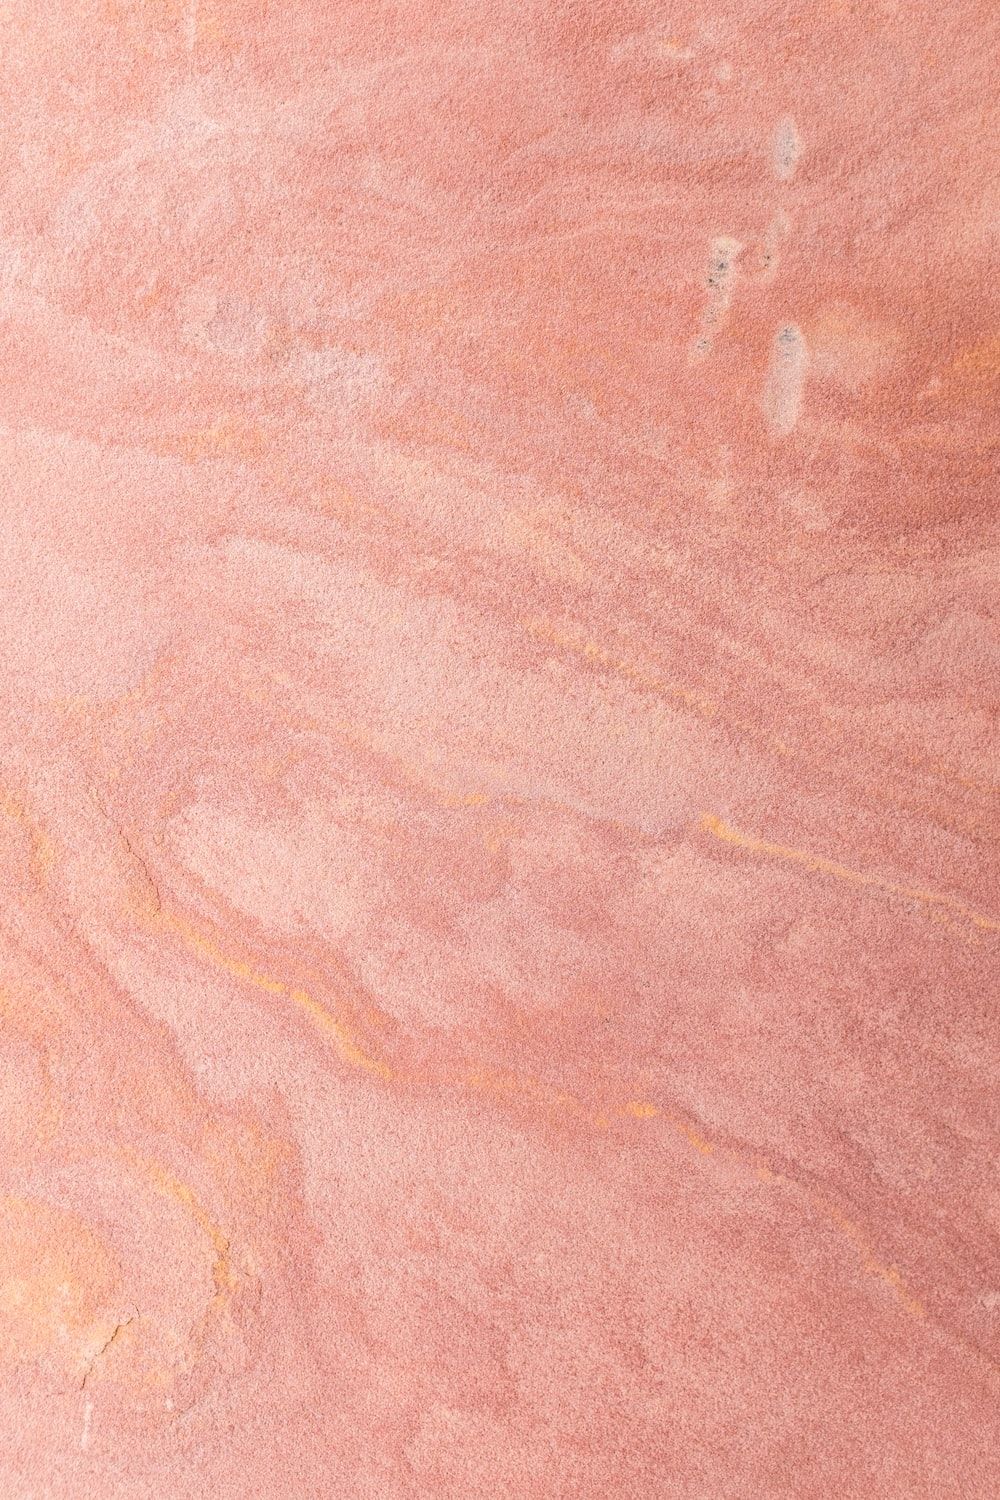 A pink marble background with a white bird on the bottom left - Gold, salmon, peach